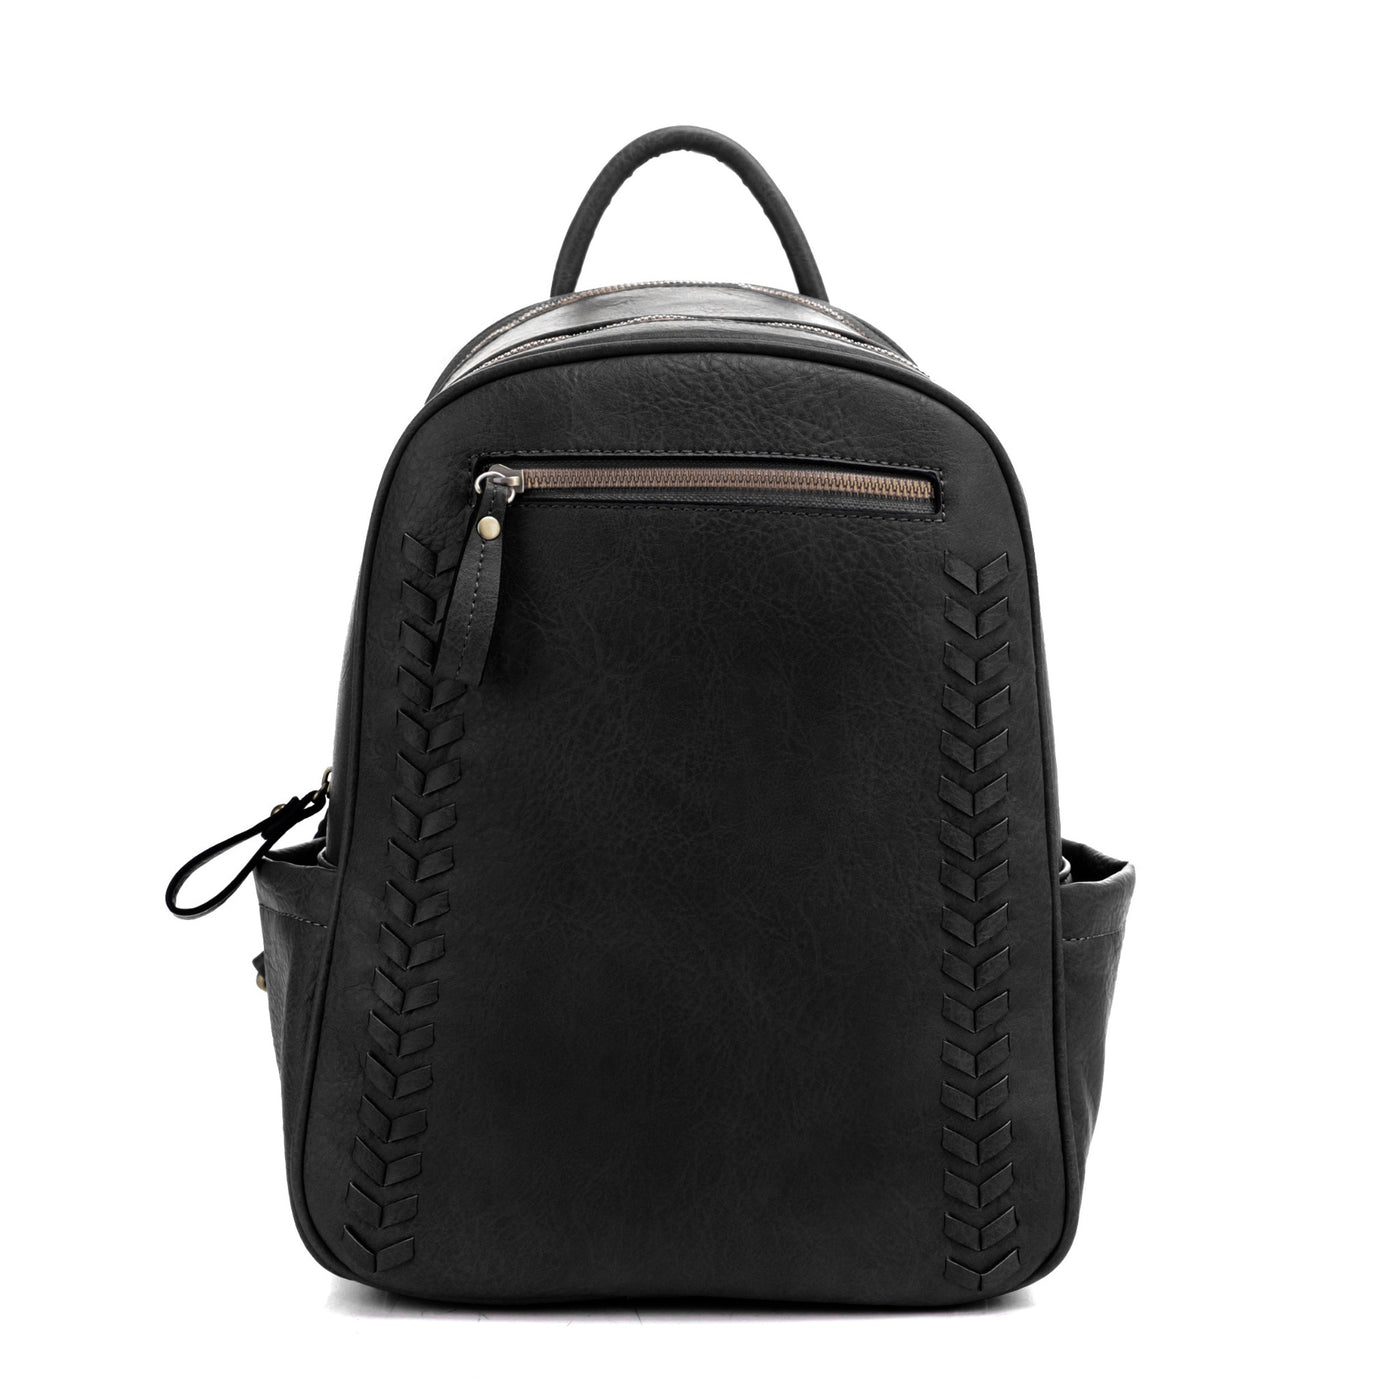 MADISON Concealed Carry Backpack Purse